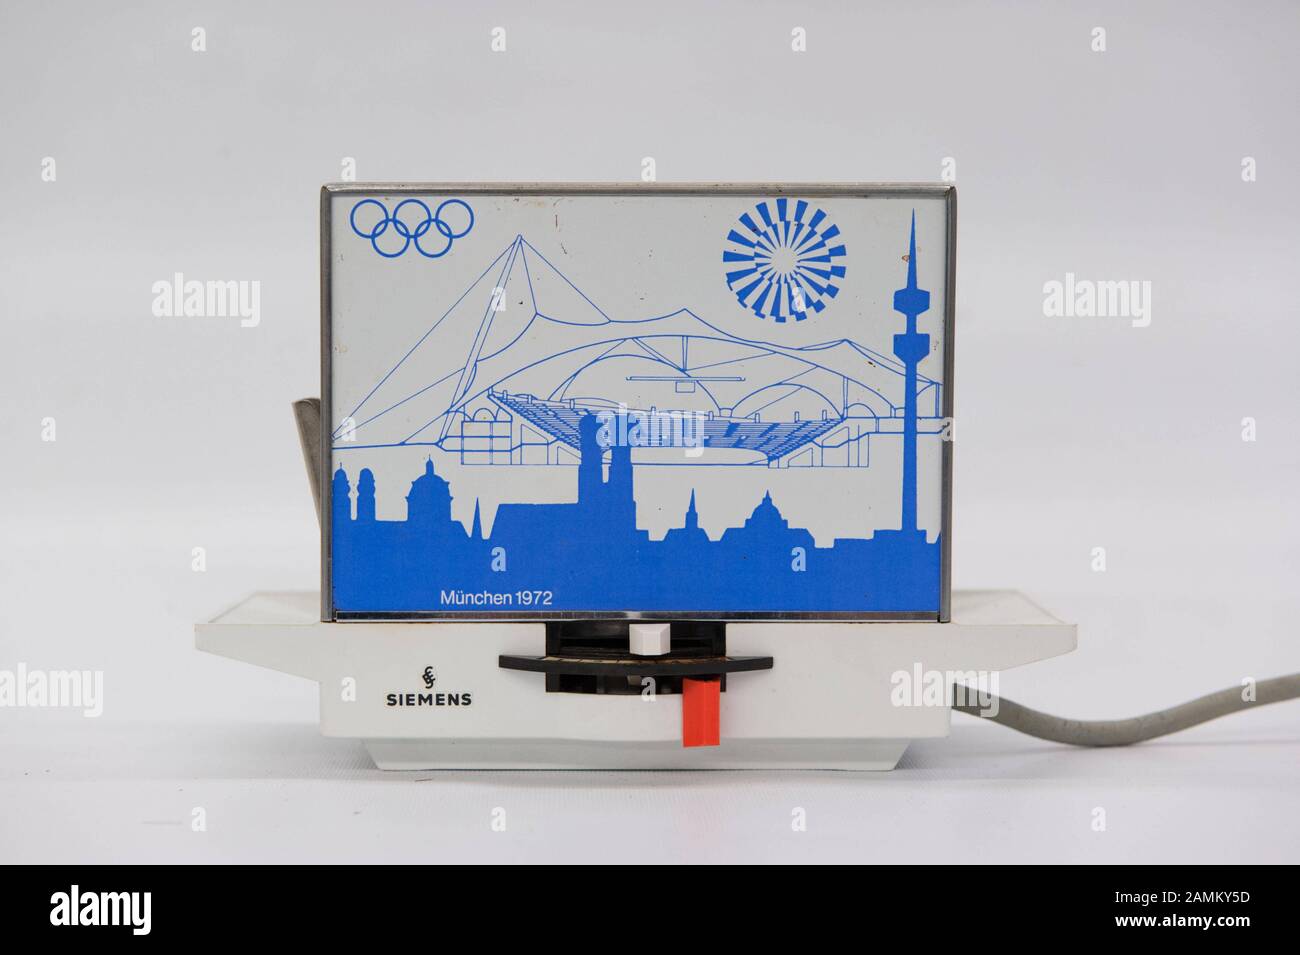 Toaster TT 450, special edition 1972 / Olympic toaster. The exhibit is housed in the archive of the Historical Institute of the Siemens Group in the Neuperlach district of Munich. [automated translation] Stock Photo